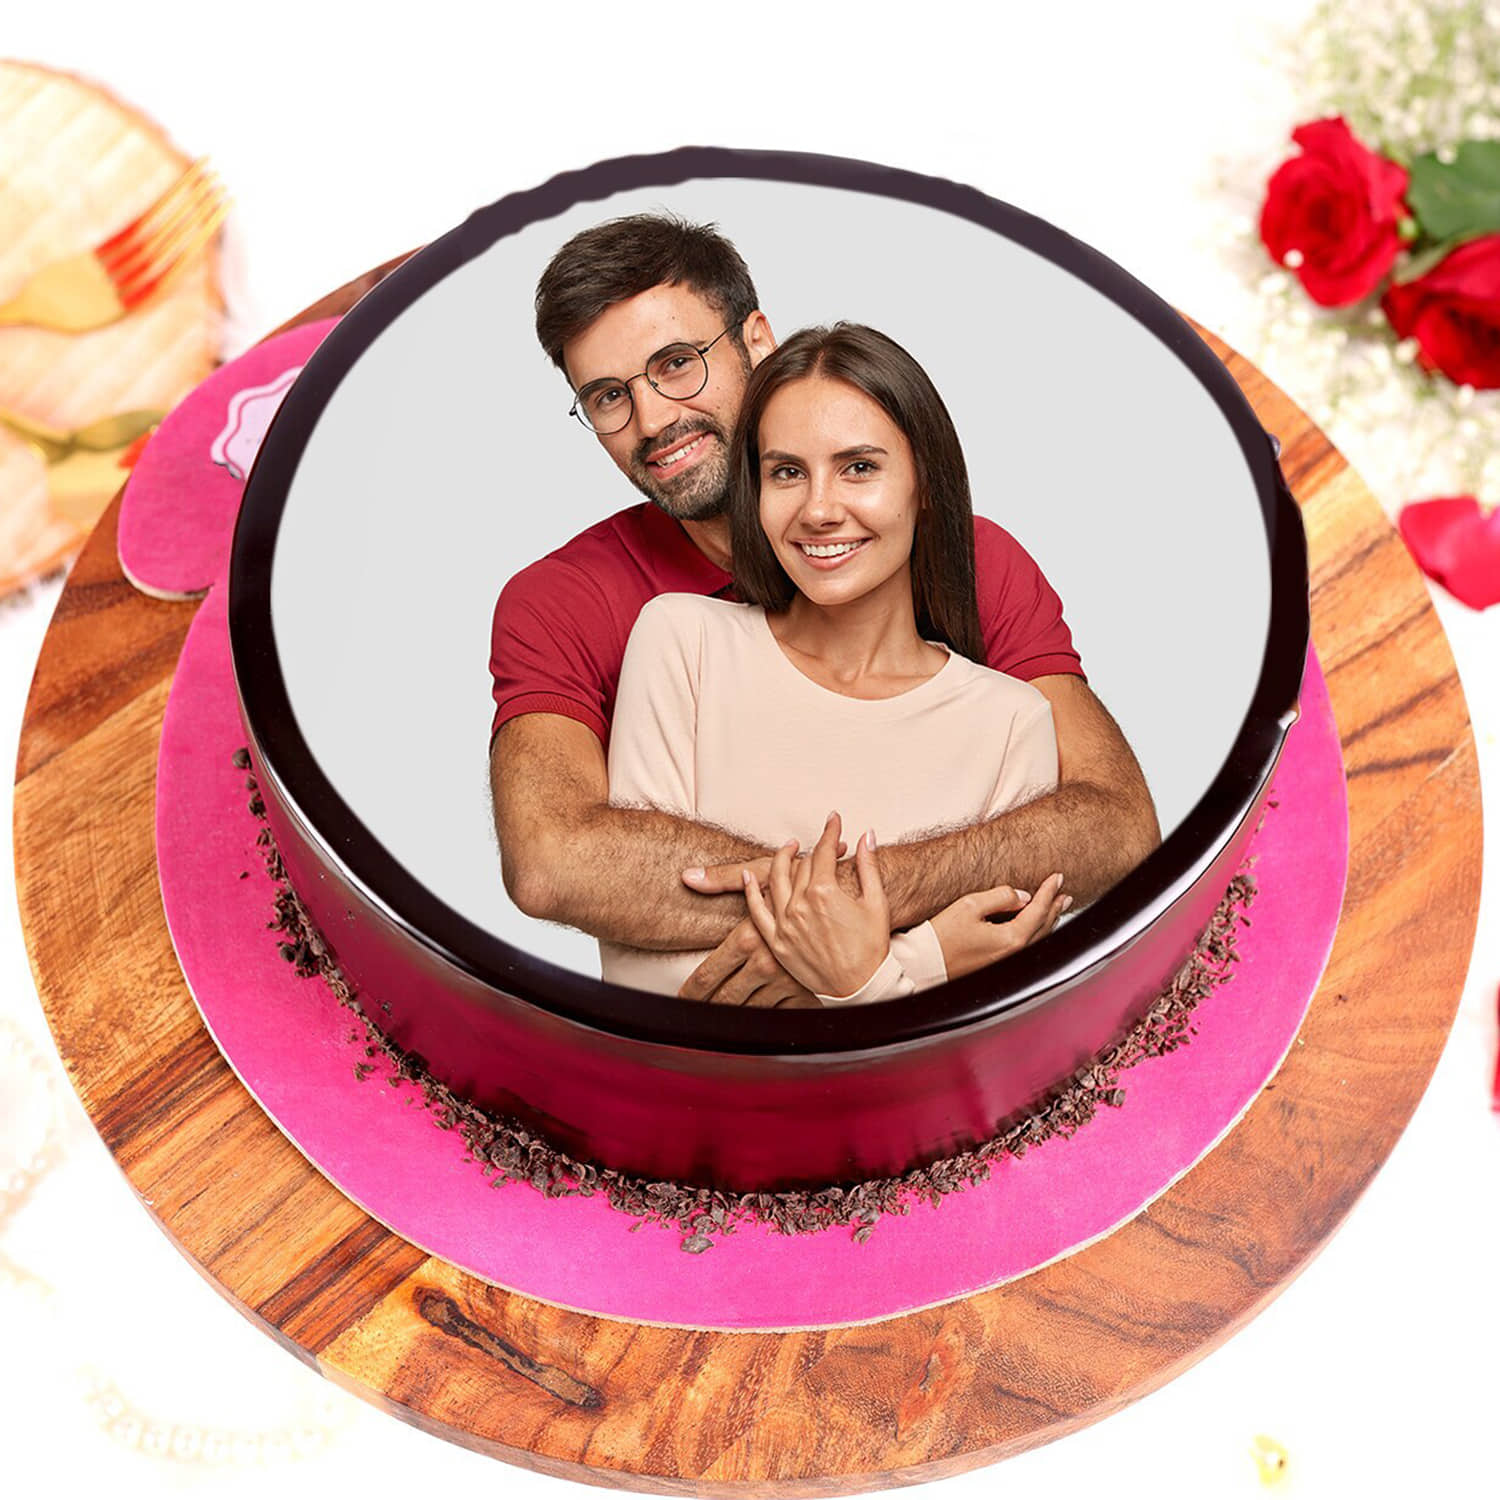 Cute Anniversary Cake with Fondant Couple | Anniversary cake, Anniversary  cake designs, Funny wedding cakes